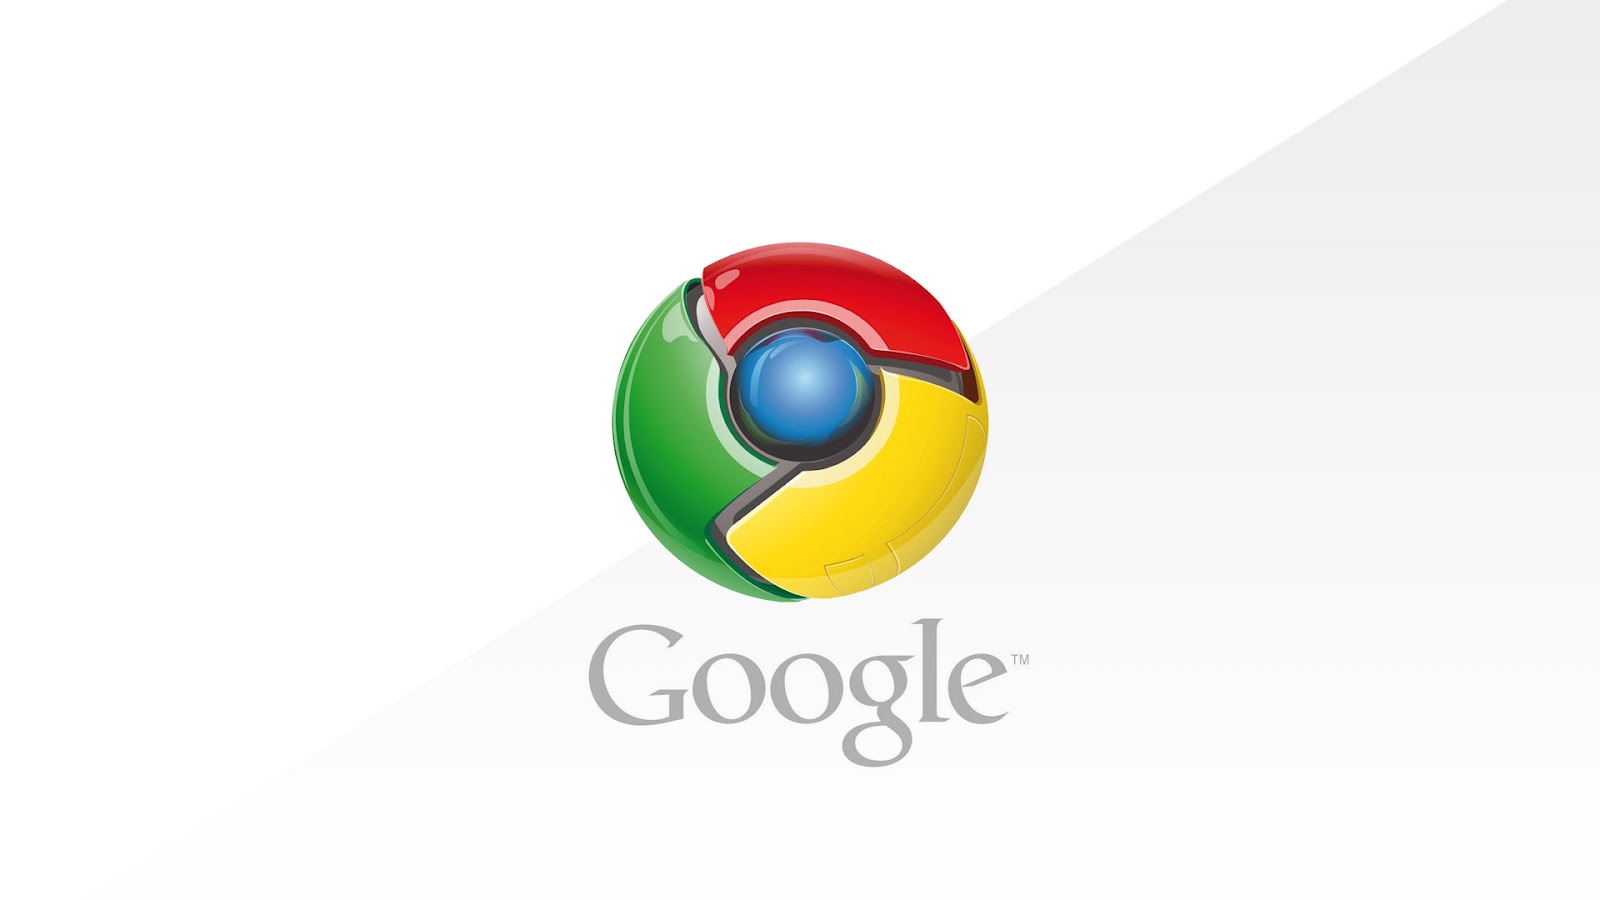 Download Free Software: Google Chrome 18.0.1025.151 Latest ...